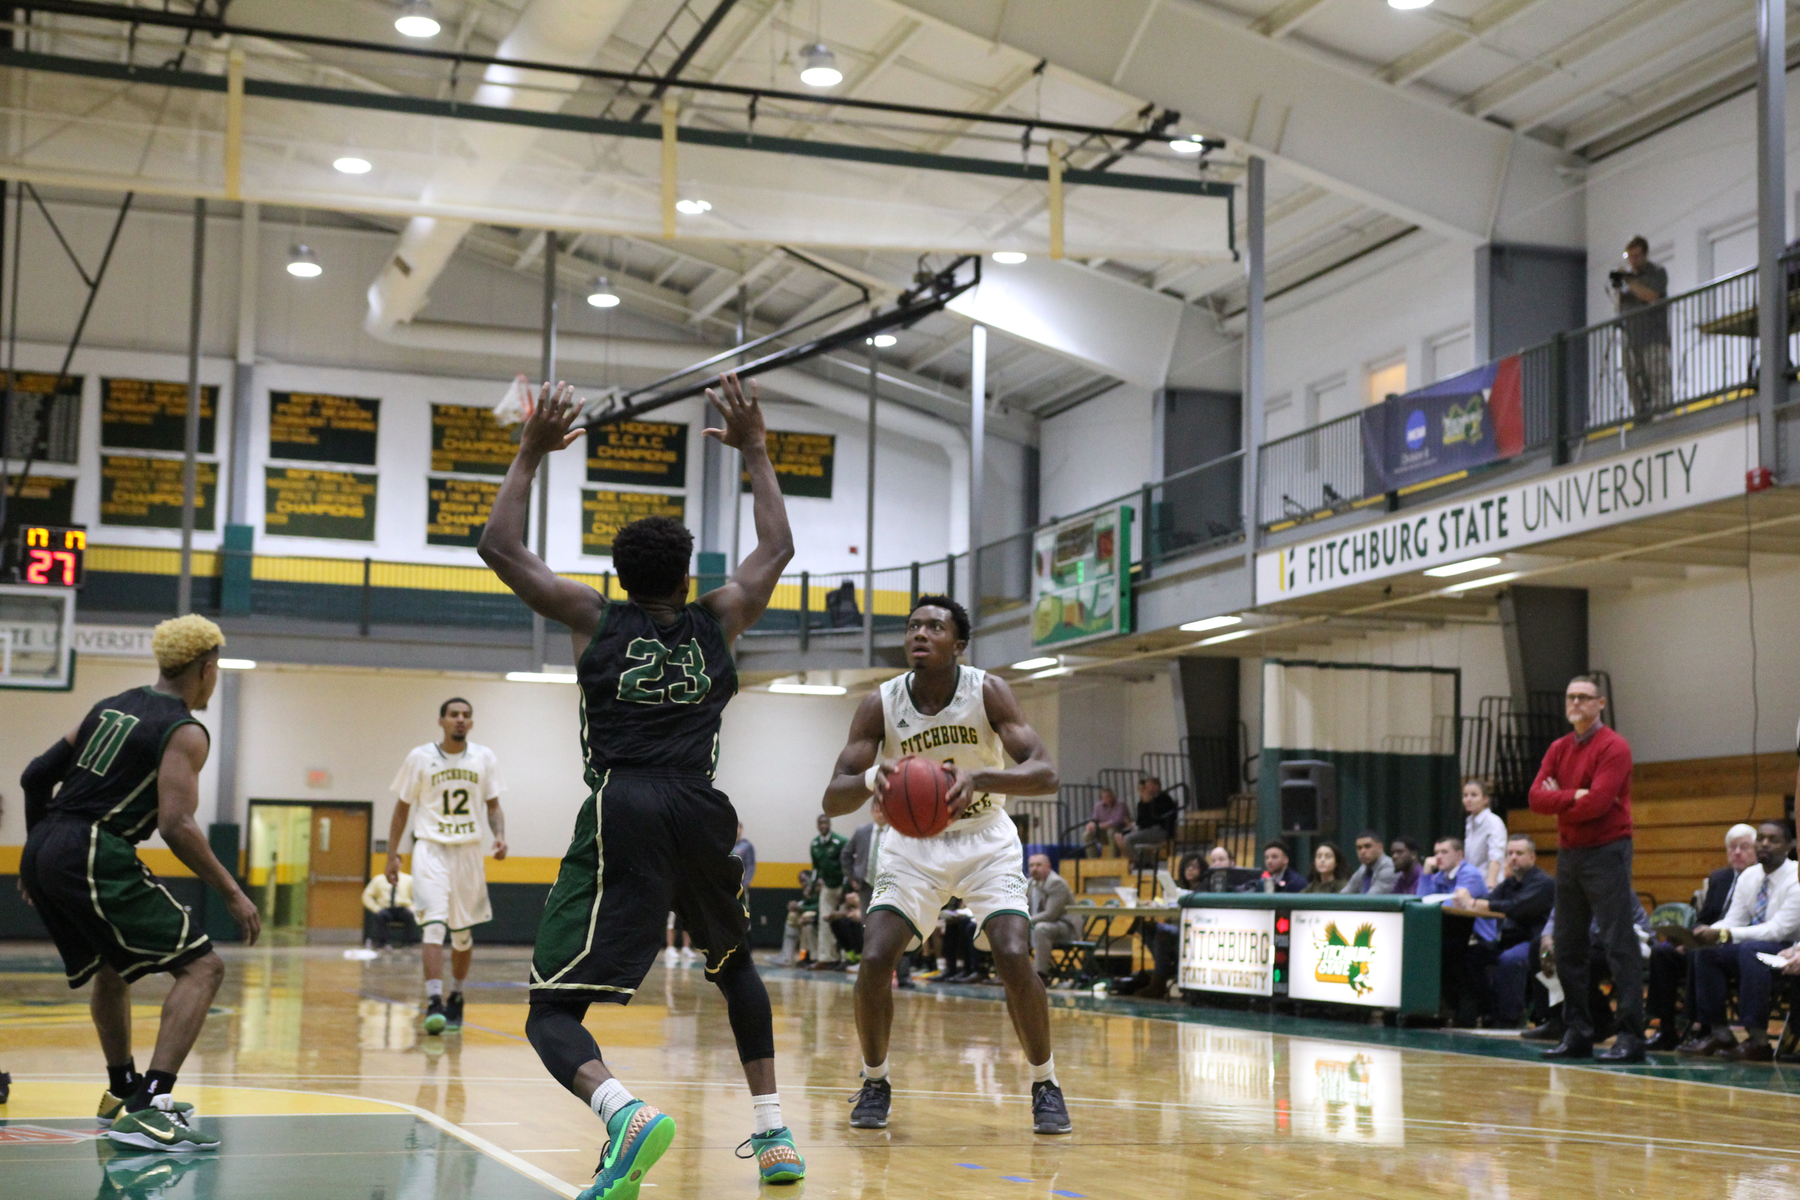 Fitchburg State Drops 84-59 Decision To MIT